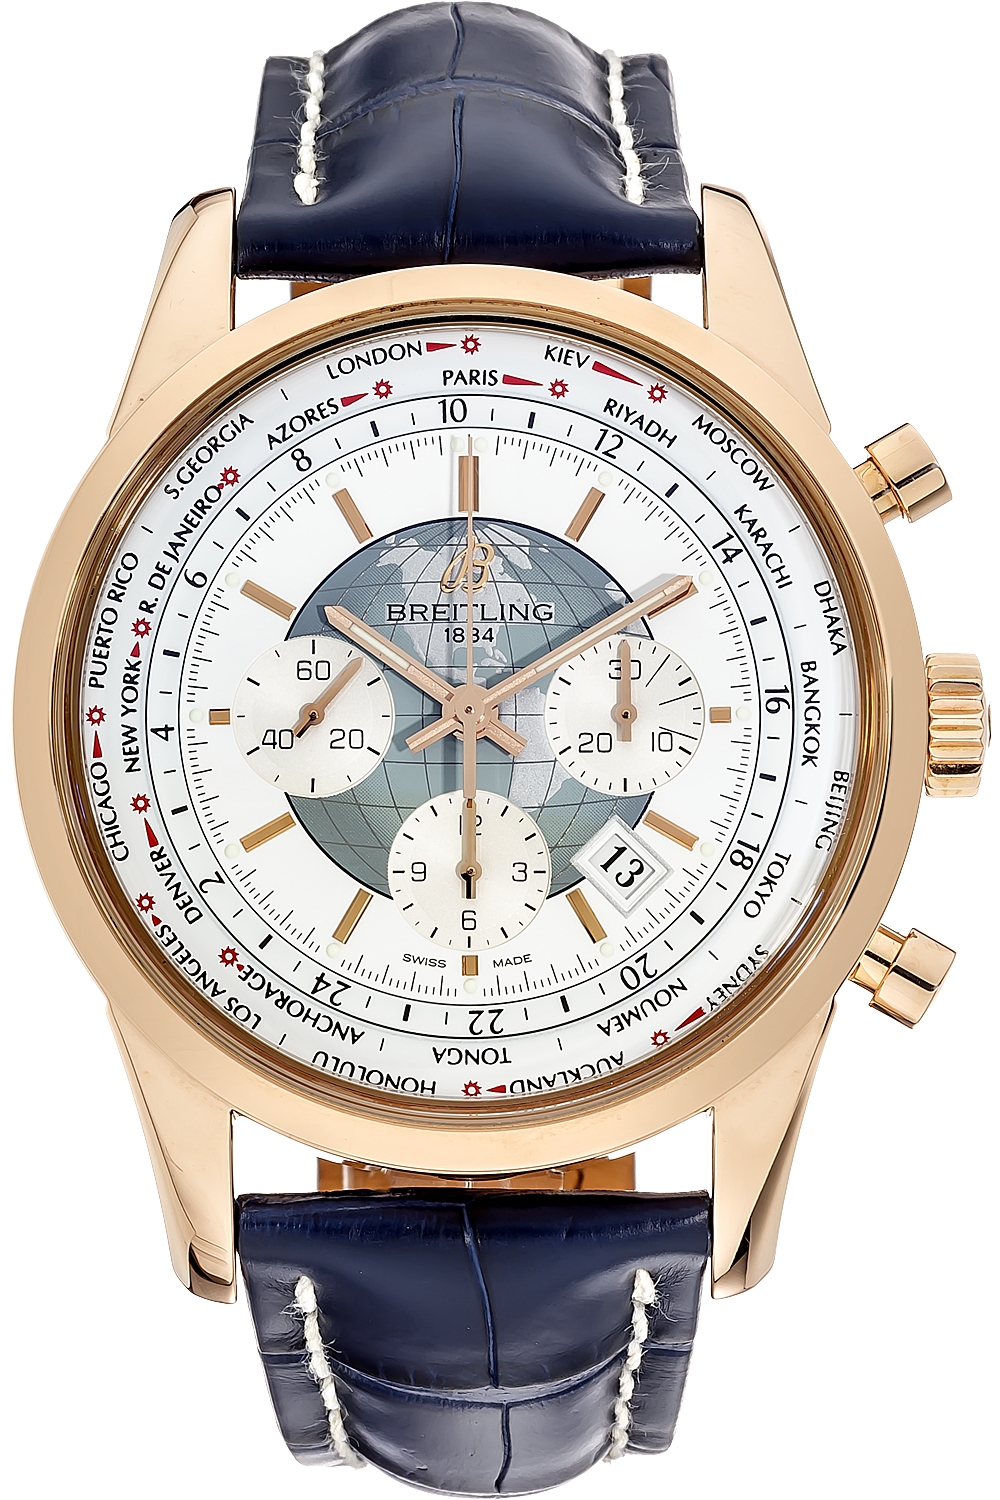 Breitling Transocean Chronograph Unitime reference RB0510 A pink